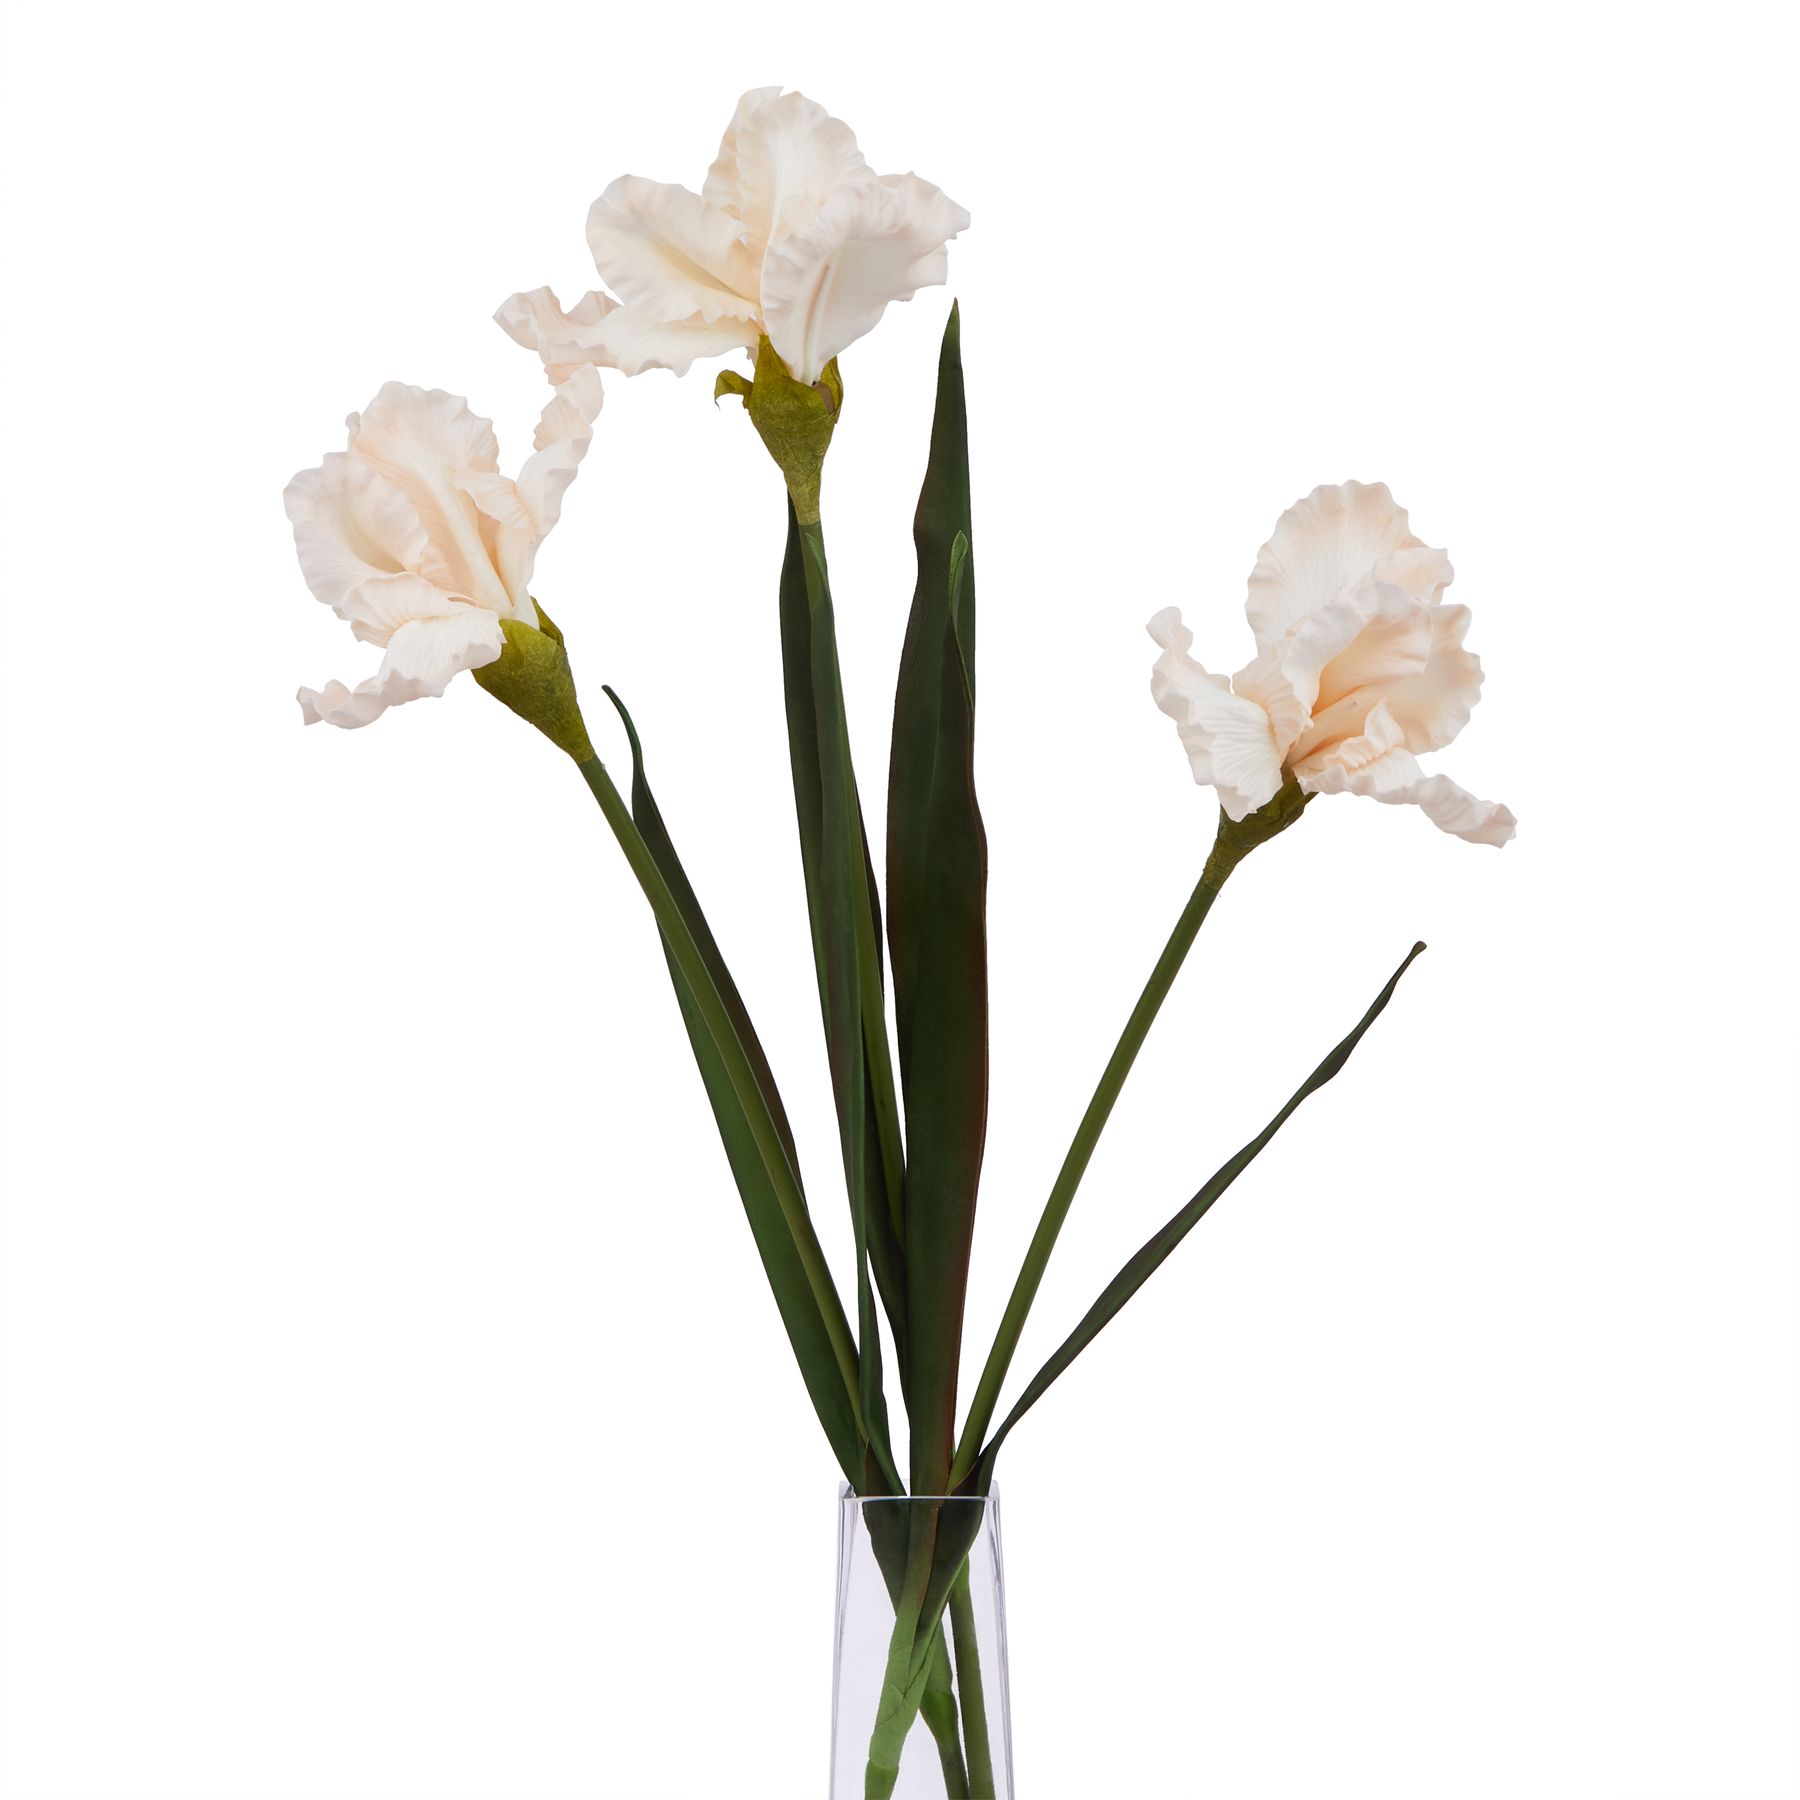 The Natural Garden Collection Pale Apricot Fringed Iris - Image 3